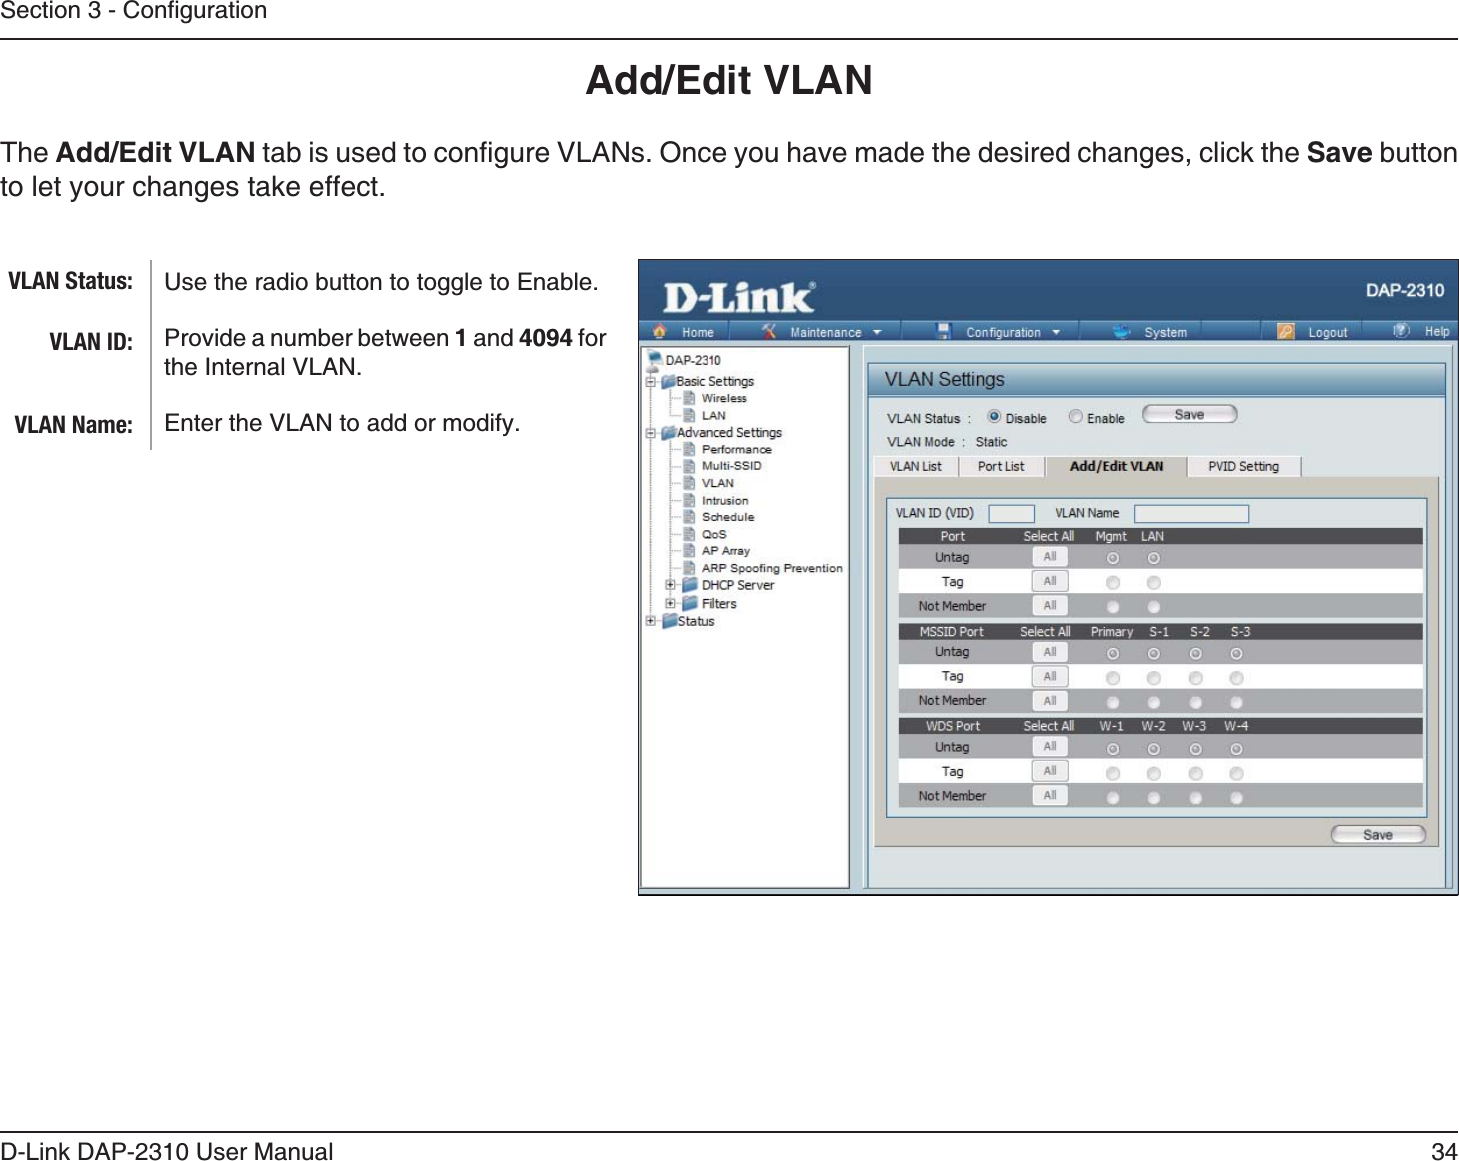 34D-Link DAP-2310 User ManualAdd/Edit VLANThe Add/Edit VLANSave button to let your changes take effect.Use the radio button to toggle to Enable. Provide a number between 1 and 4094 for the Internal VLAN.Enter the VLAN to add or modify.VLAN Status:VLAN ID:VLAN Name: